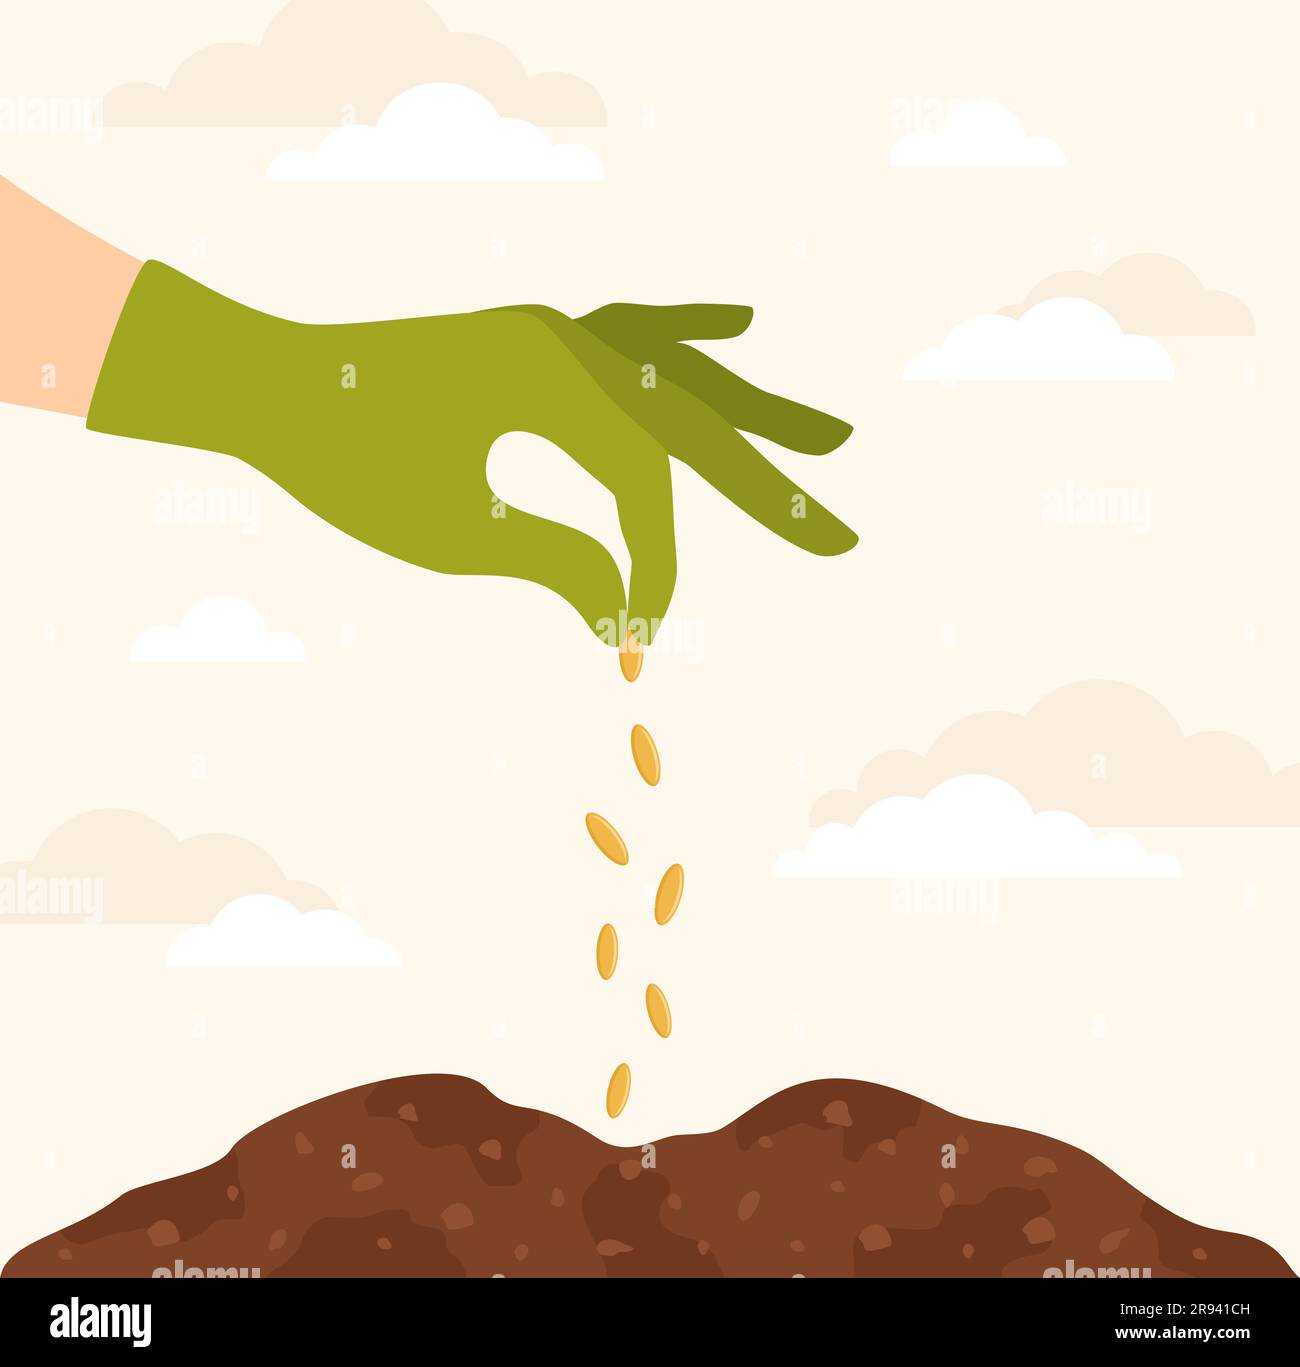 A hand in a rubber glove pouring seeds into a hole in the soil.  Flat vector illustration Stock Vector